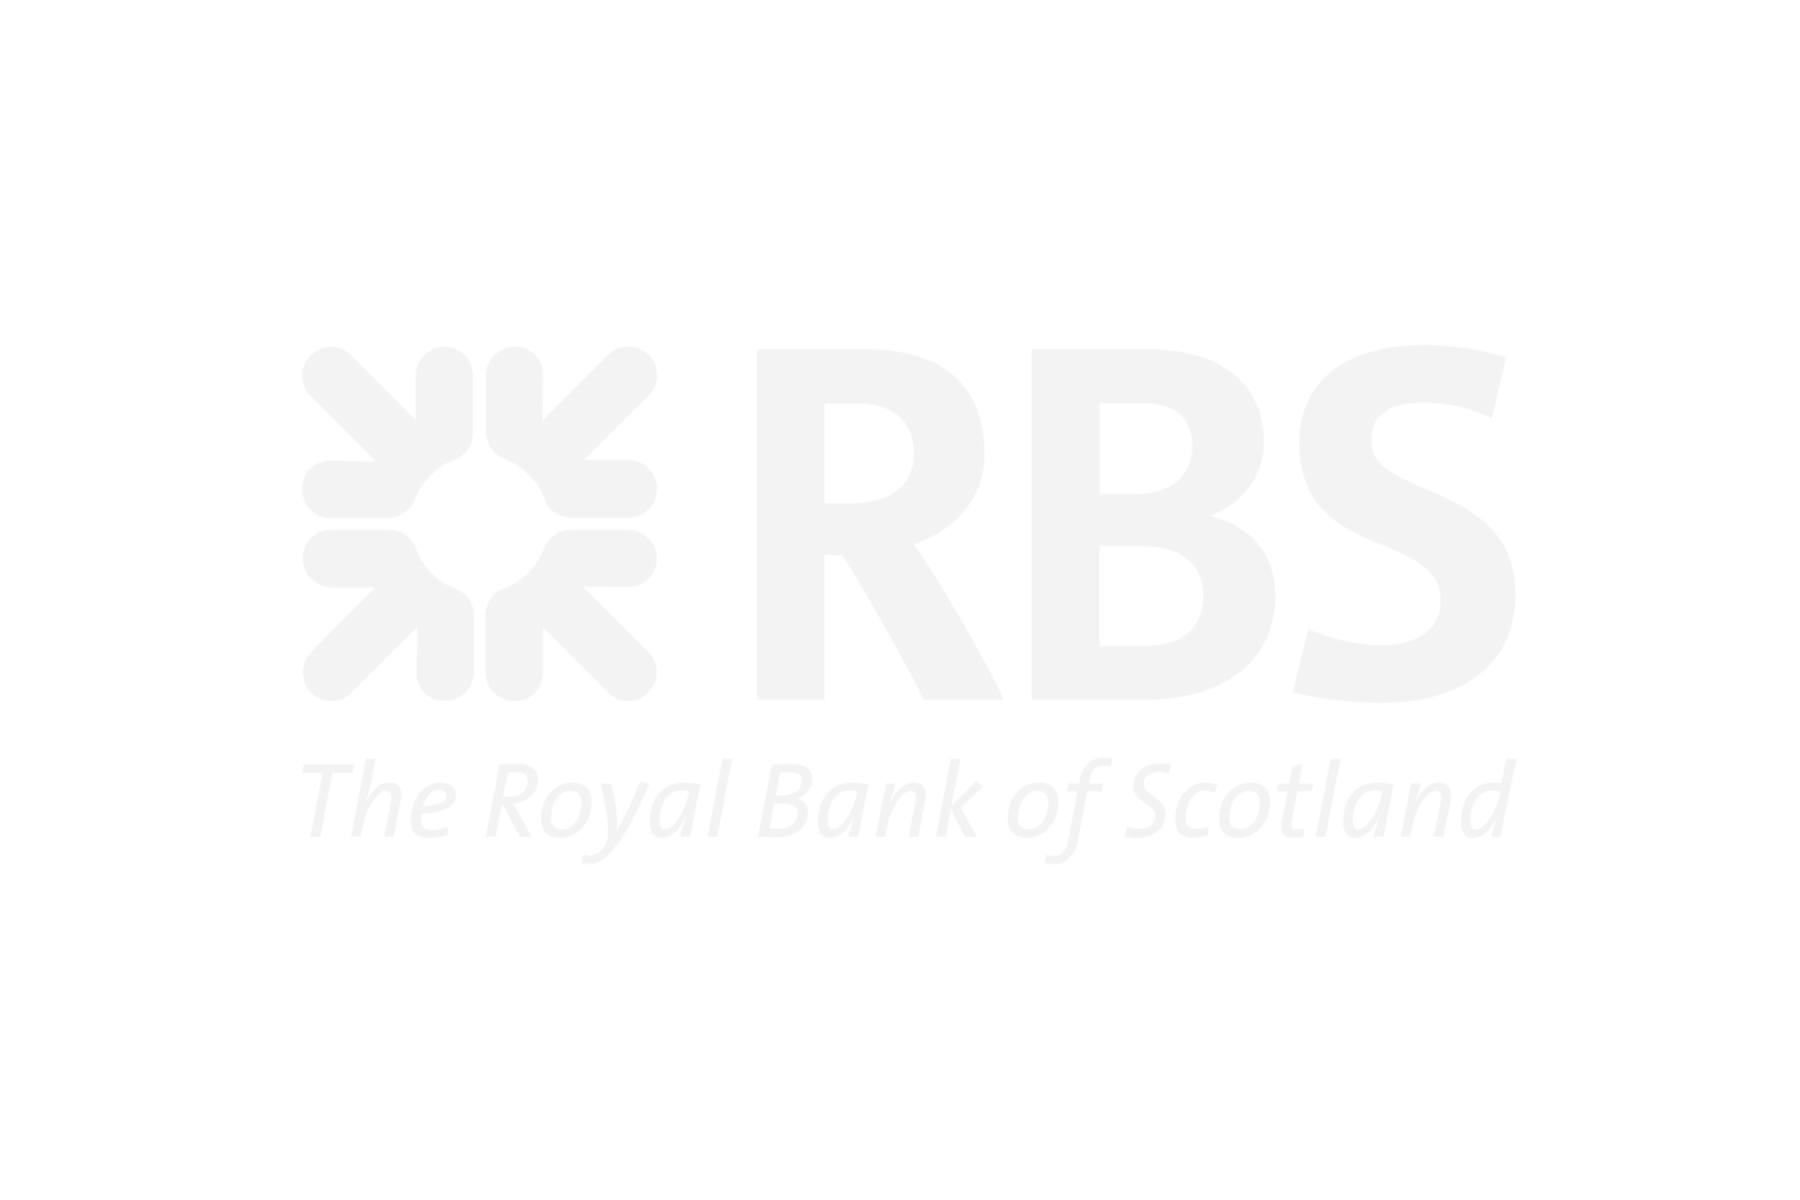 rbs.png